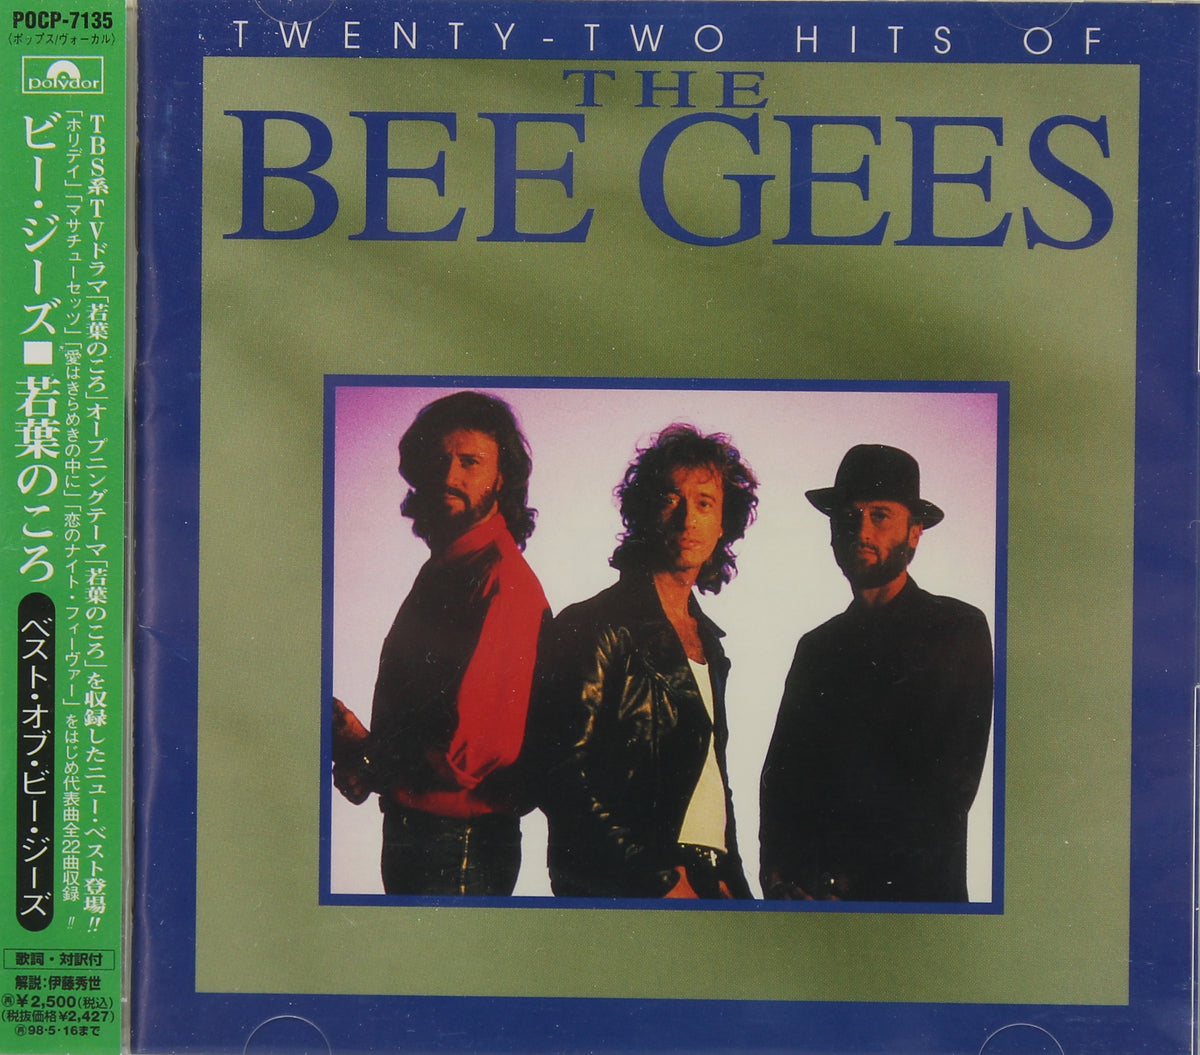 Bee Gees ‎– Twenty-Two Hits Of The Bee Gees, CD, Album, Compilation, Reissue, Japan 1996